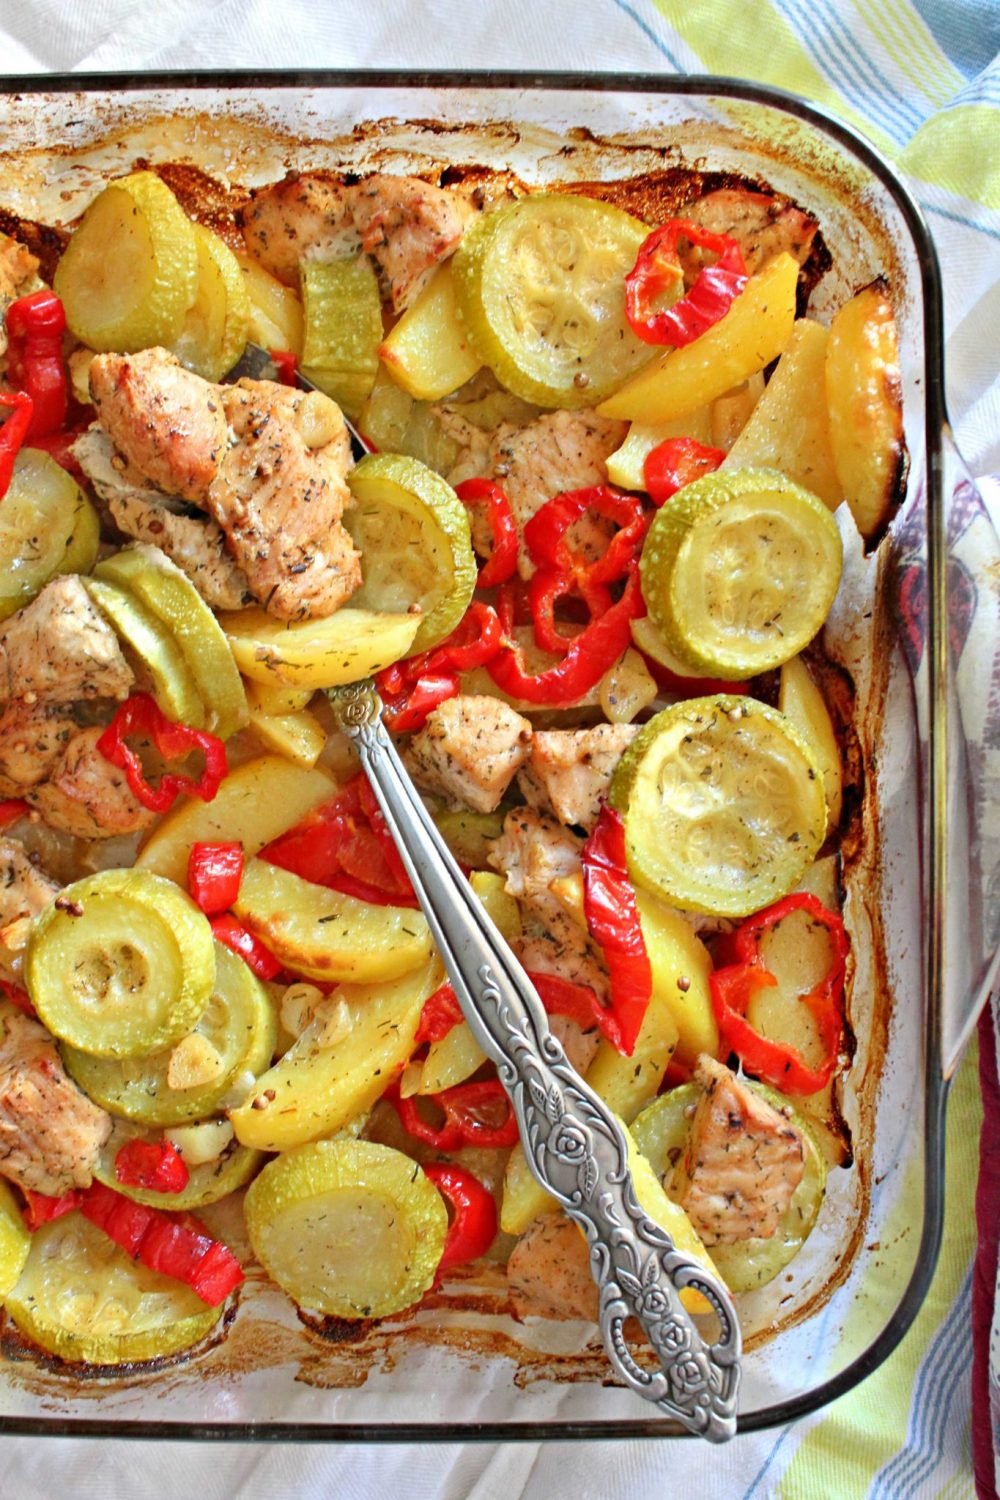 Baking dish with sweet and picy turkey breast and vegetables, made with brown sugar, paprika lemon juice and herbs